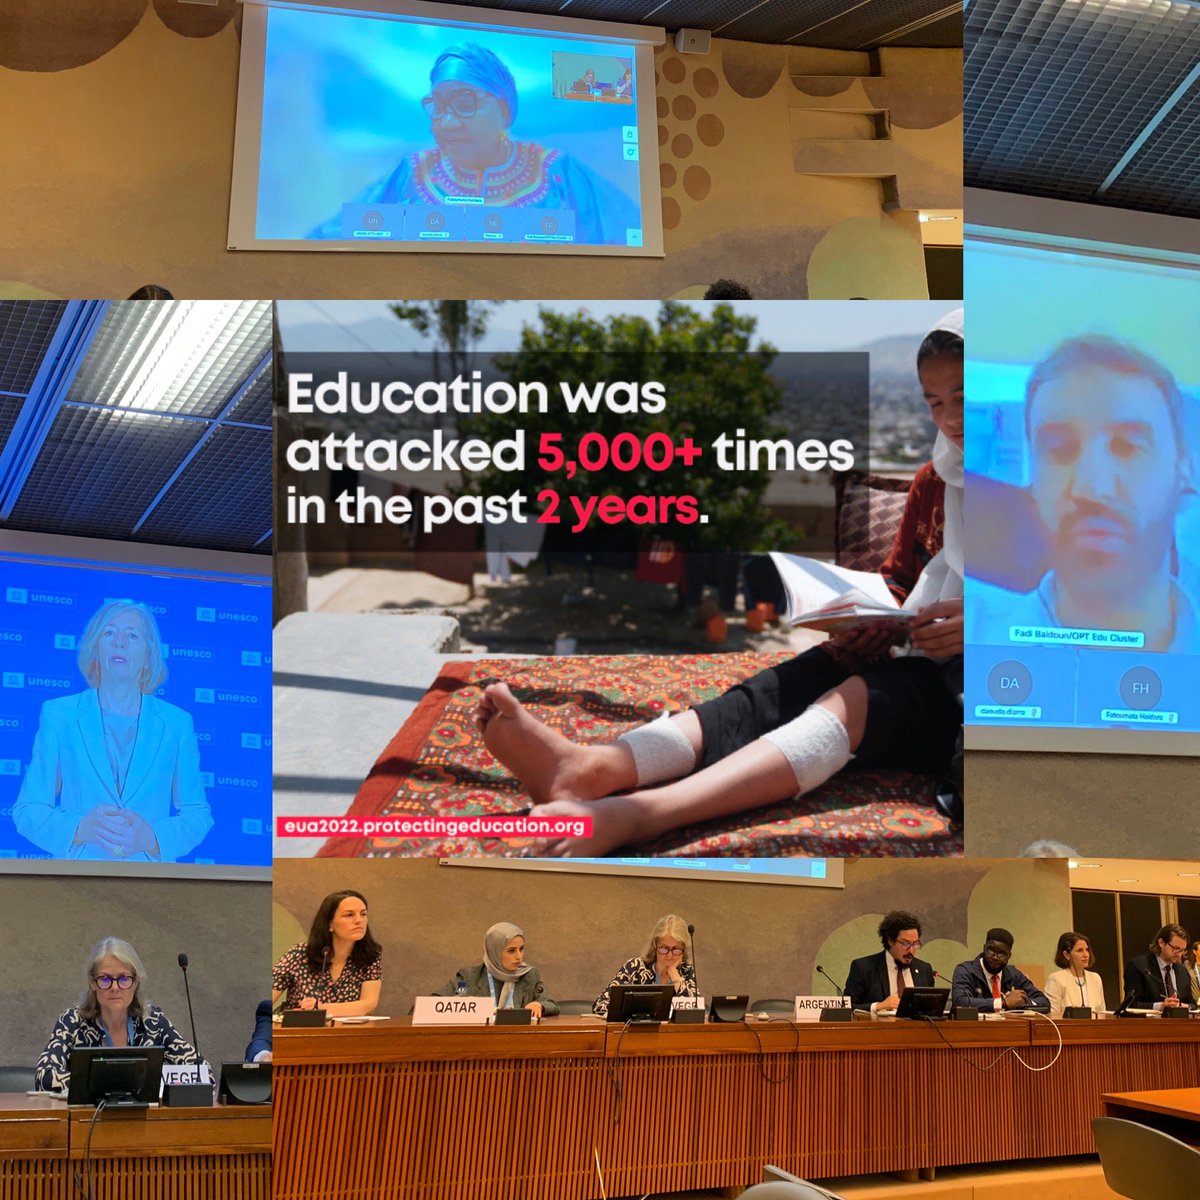 🔸When education is safe, lives are saved
🔸Important to invest in & involve youth 
🔸Education protected = children protected
🔸 More awareness on schools #NotATarget 
🔸Endorse & implement #SafeSchoolsDeclaration 

🔊Clear messages at launch of #EducationUnderAttack2022 report